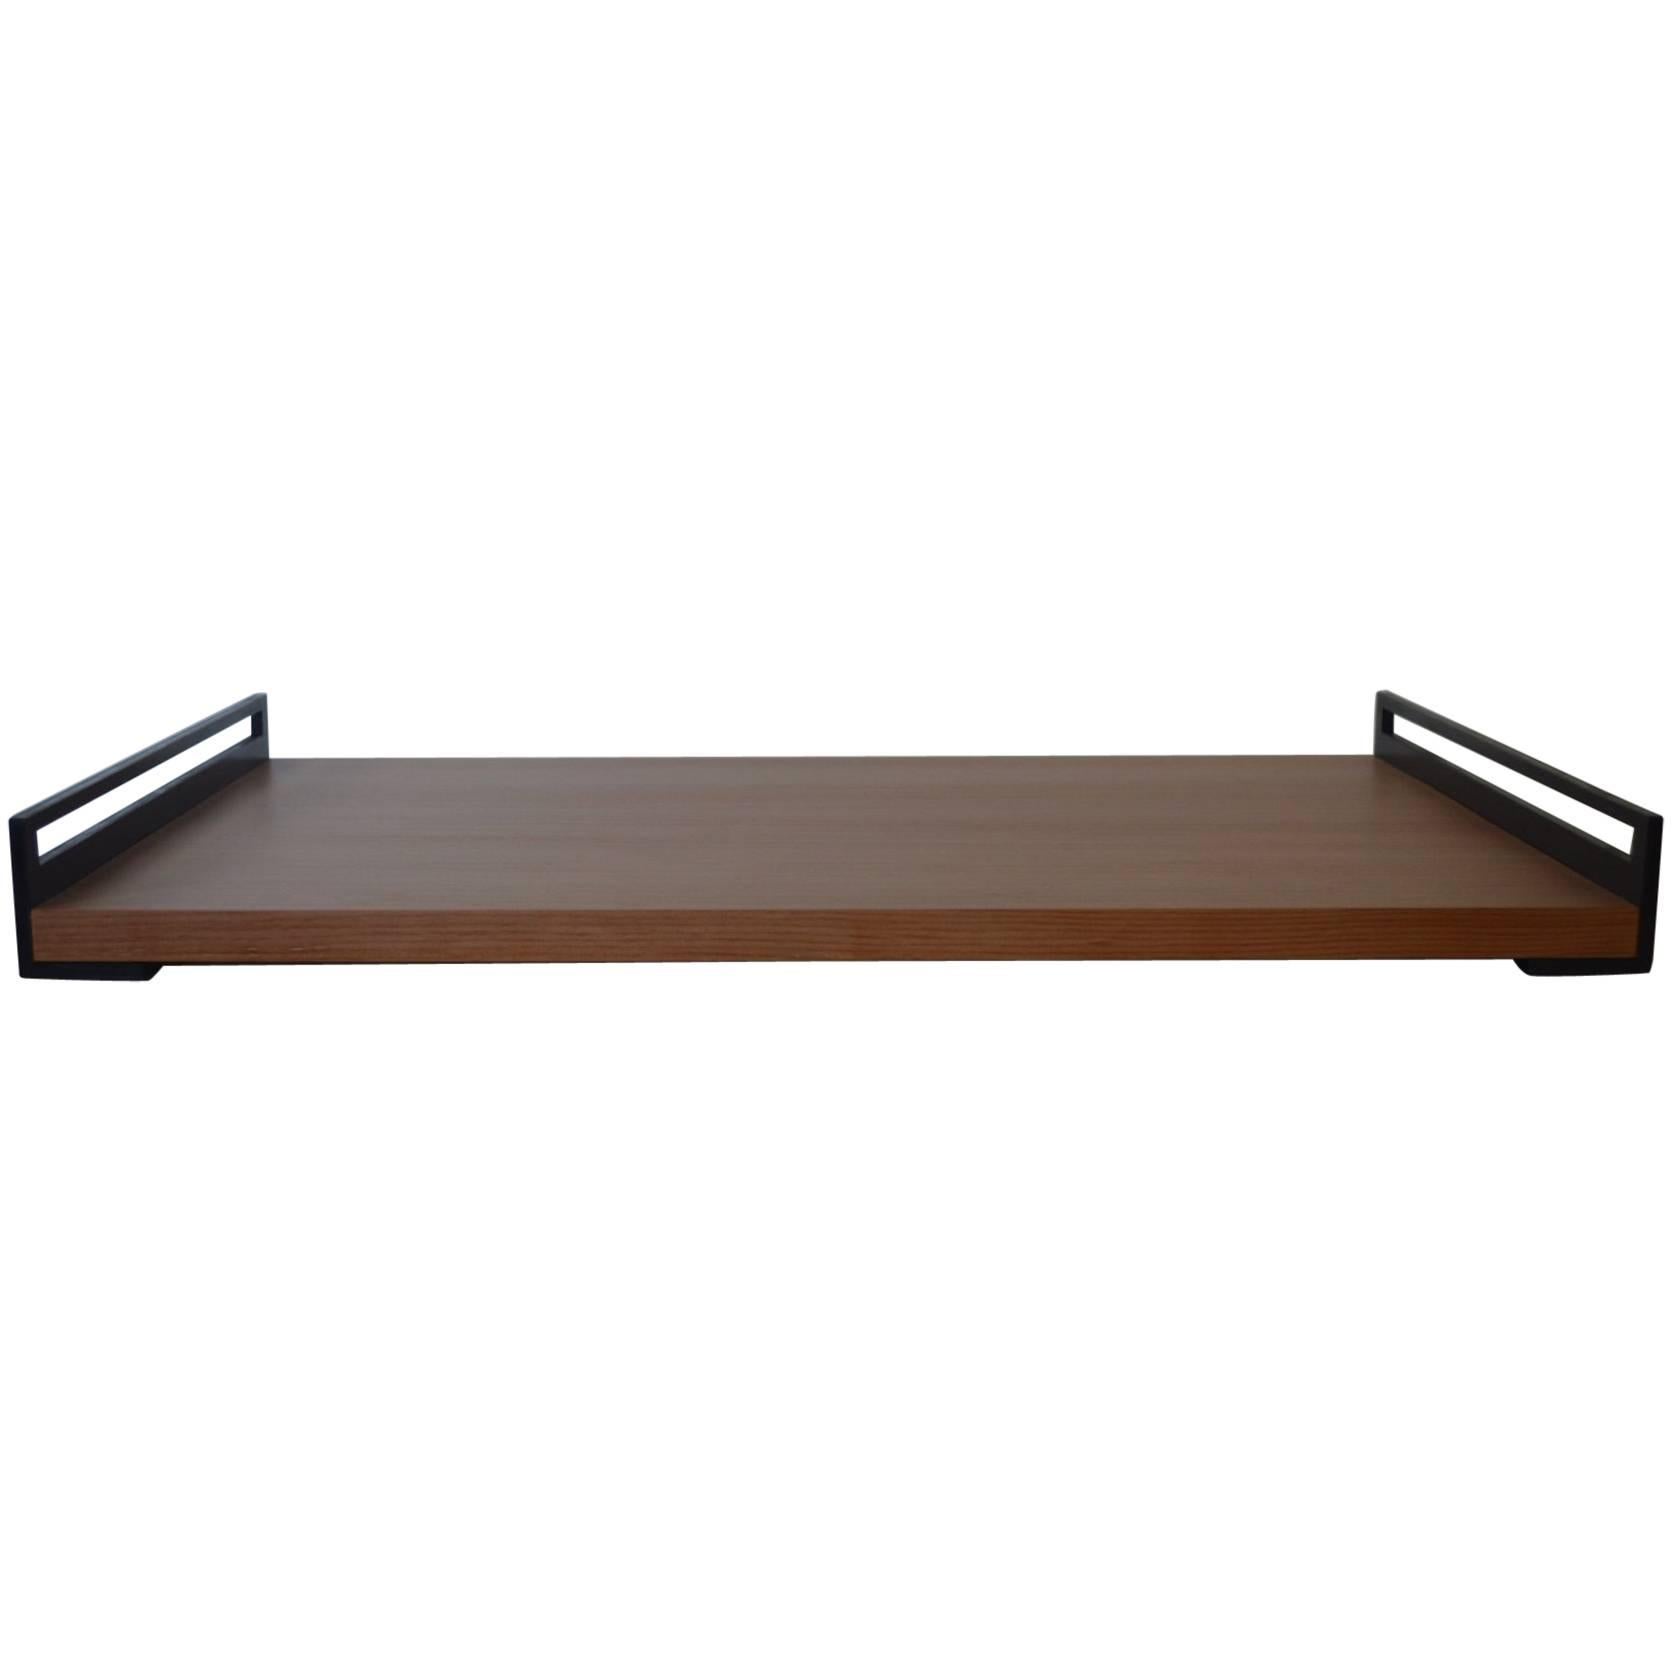 Contemporary Minimalist Blackened Steel and Wood Service Tray-IN STOCK For Sale